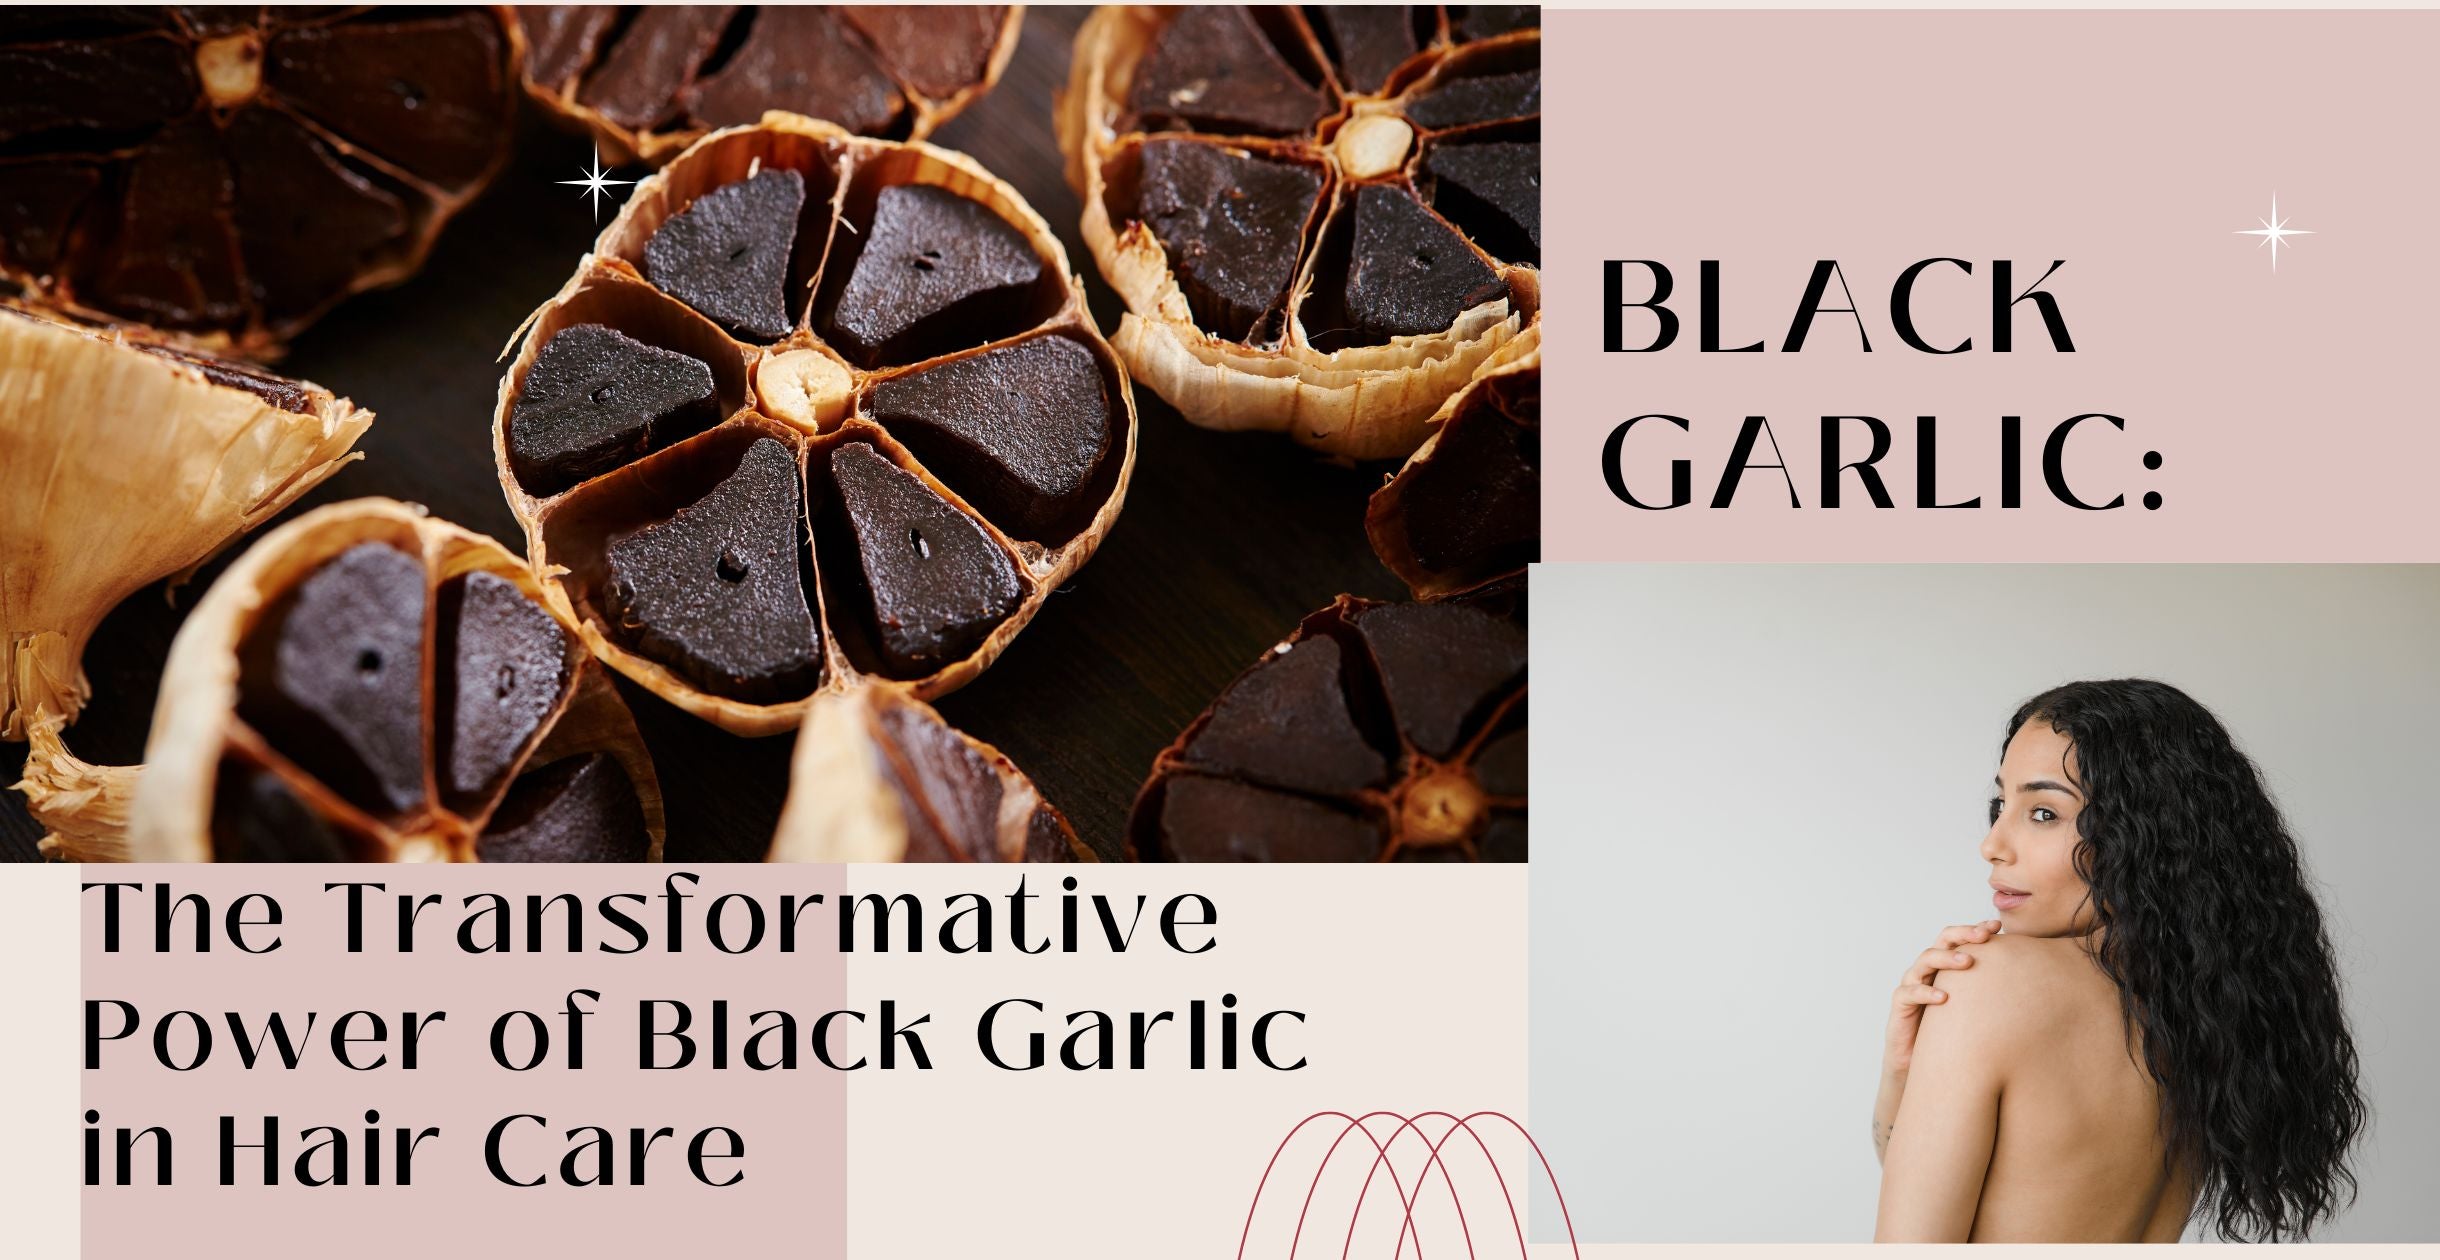 The Transformative Power of Black Garlic in Hair Care